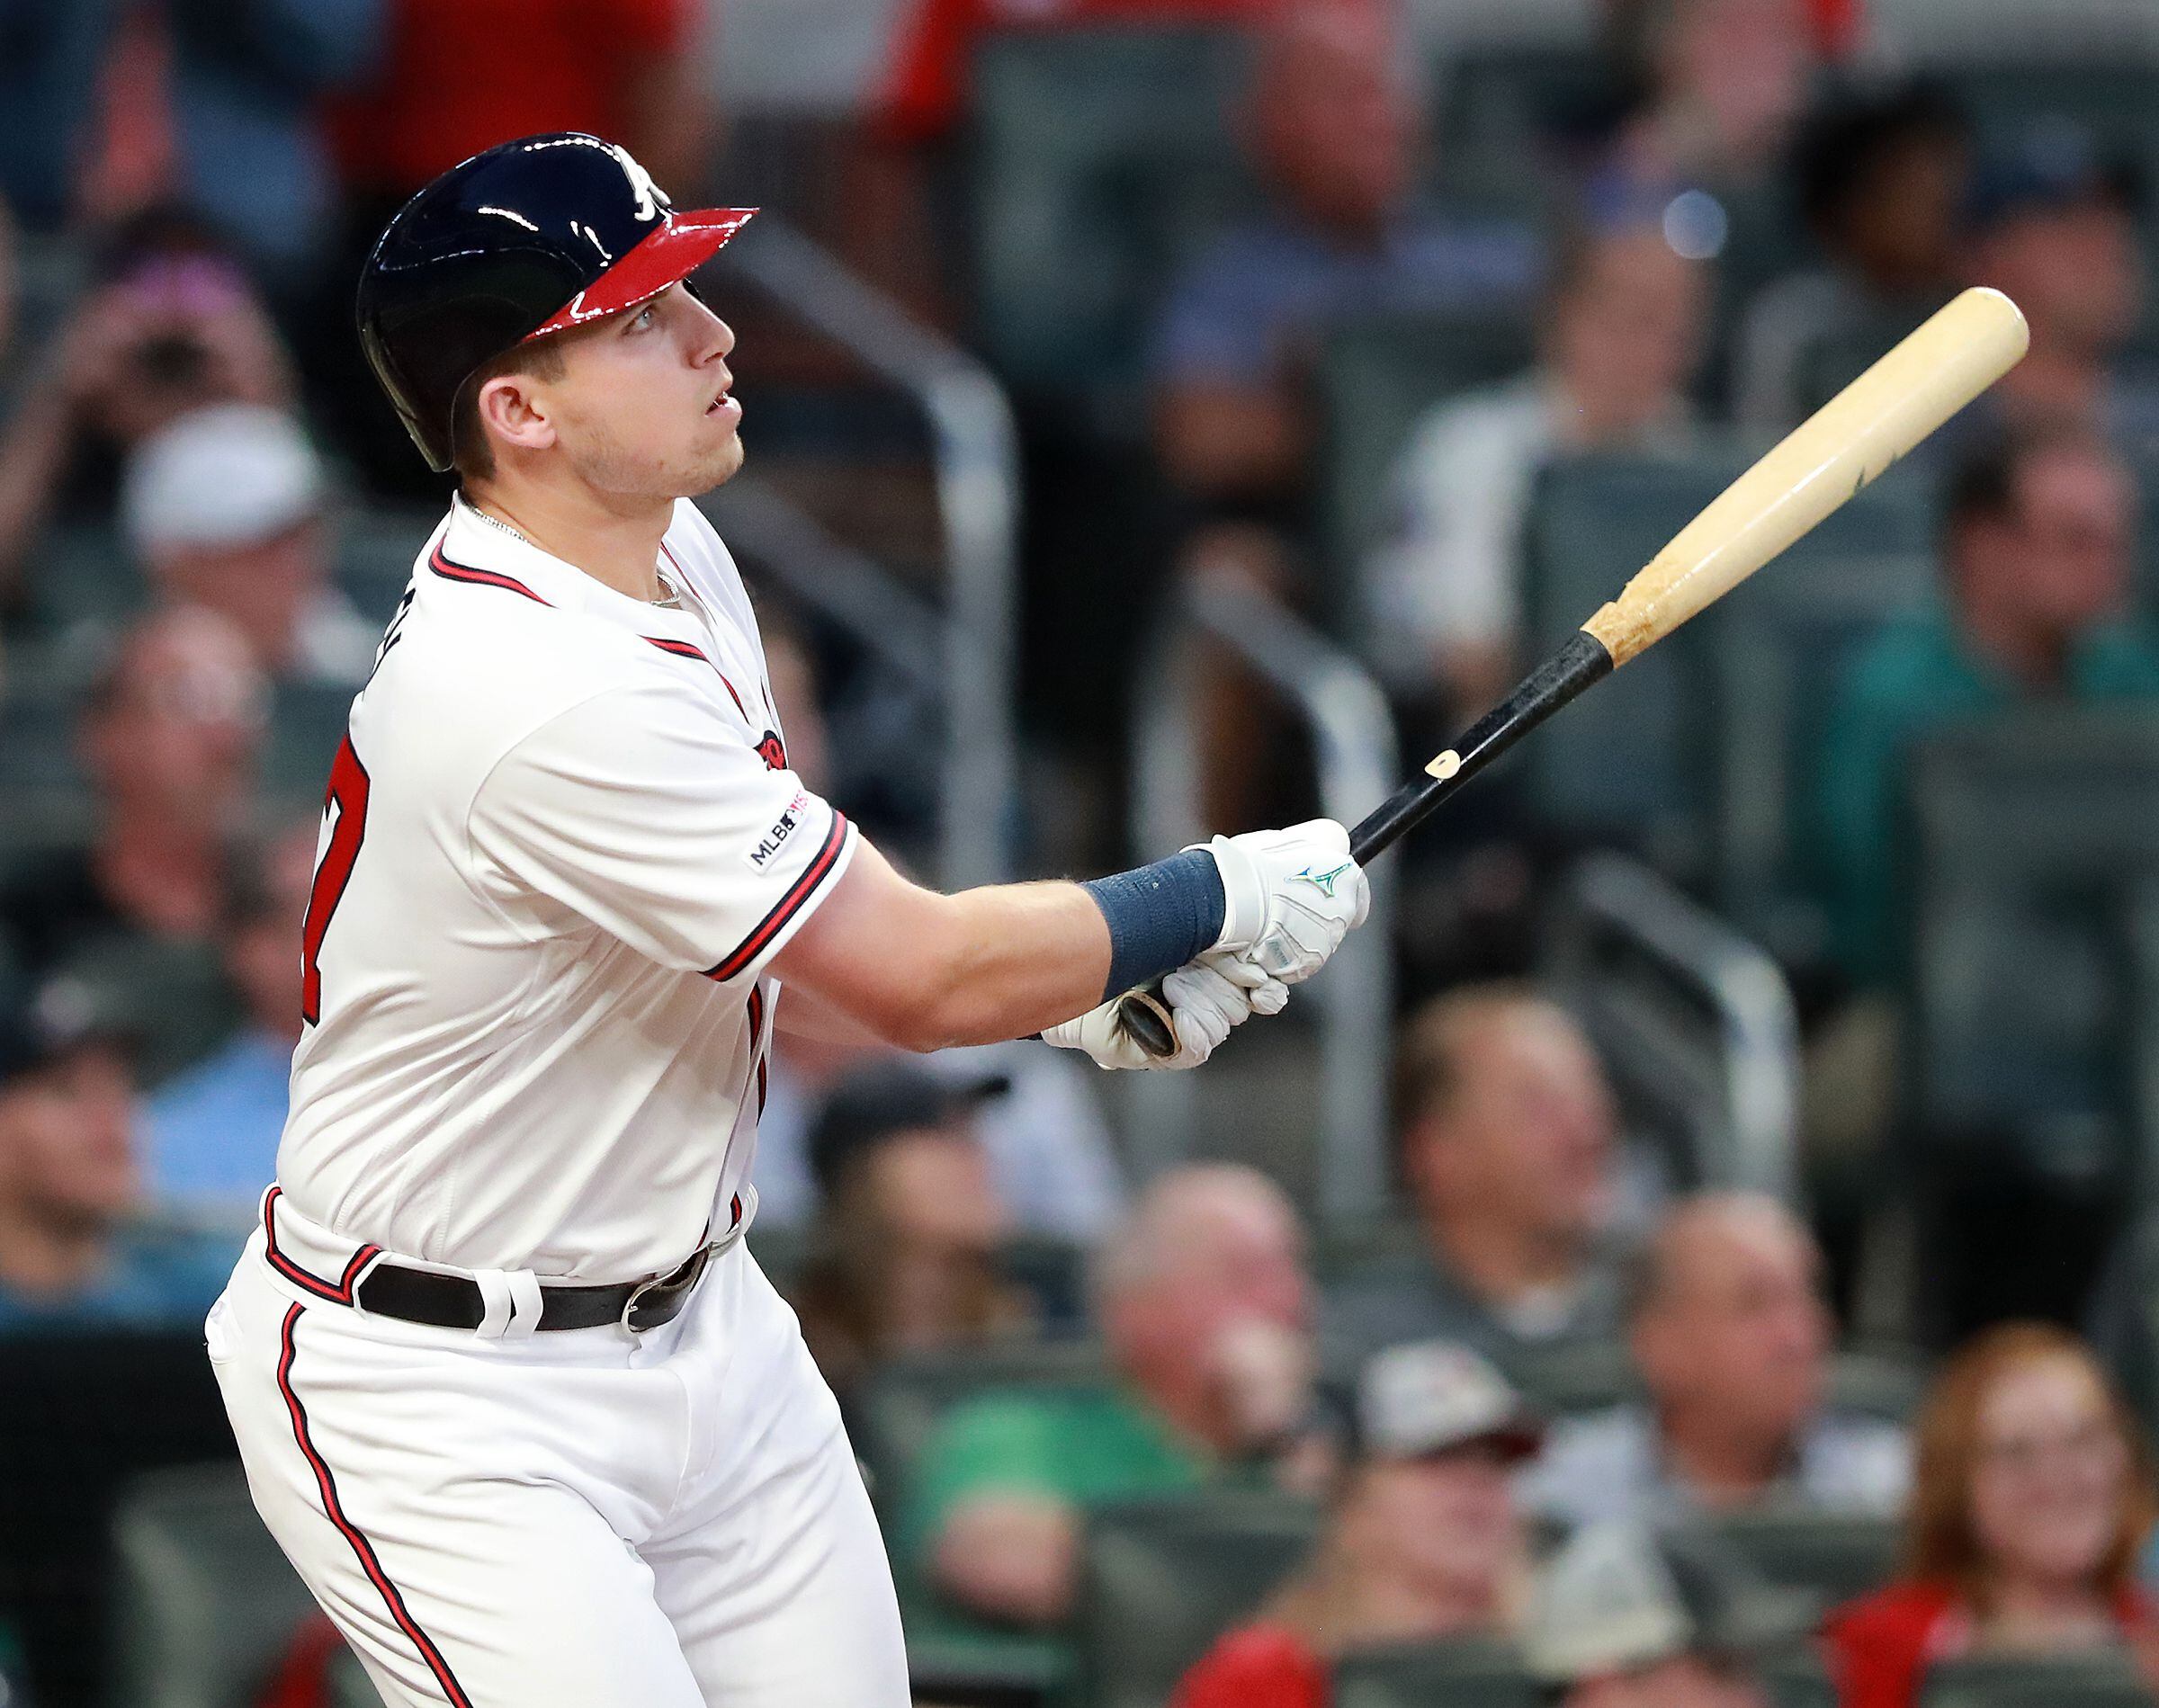 Grant McAuley on X: Not only did The Jones Boys bat consecutively in the  #Braves lineup for years, hitting back-to-back home runs nine times, but  Andruw (April 23) and Chipper (April 24)